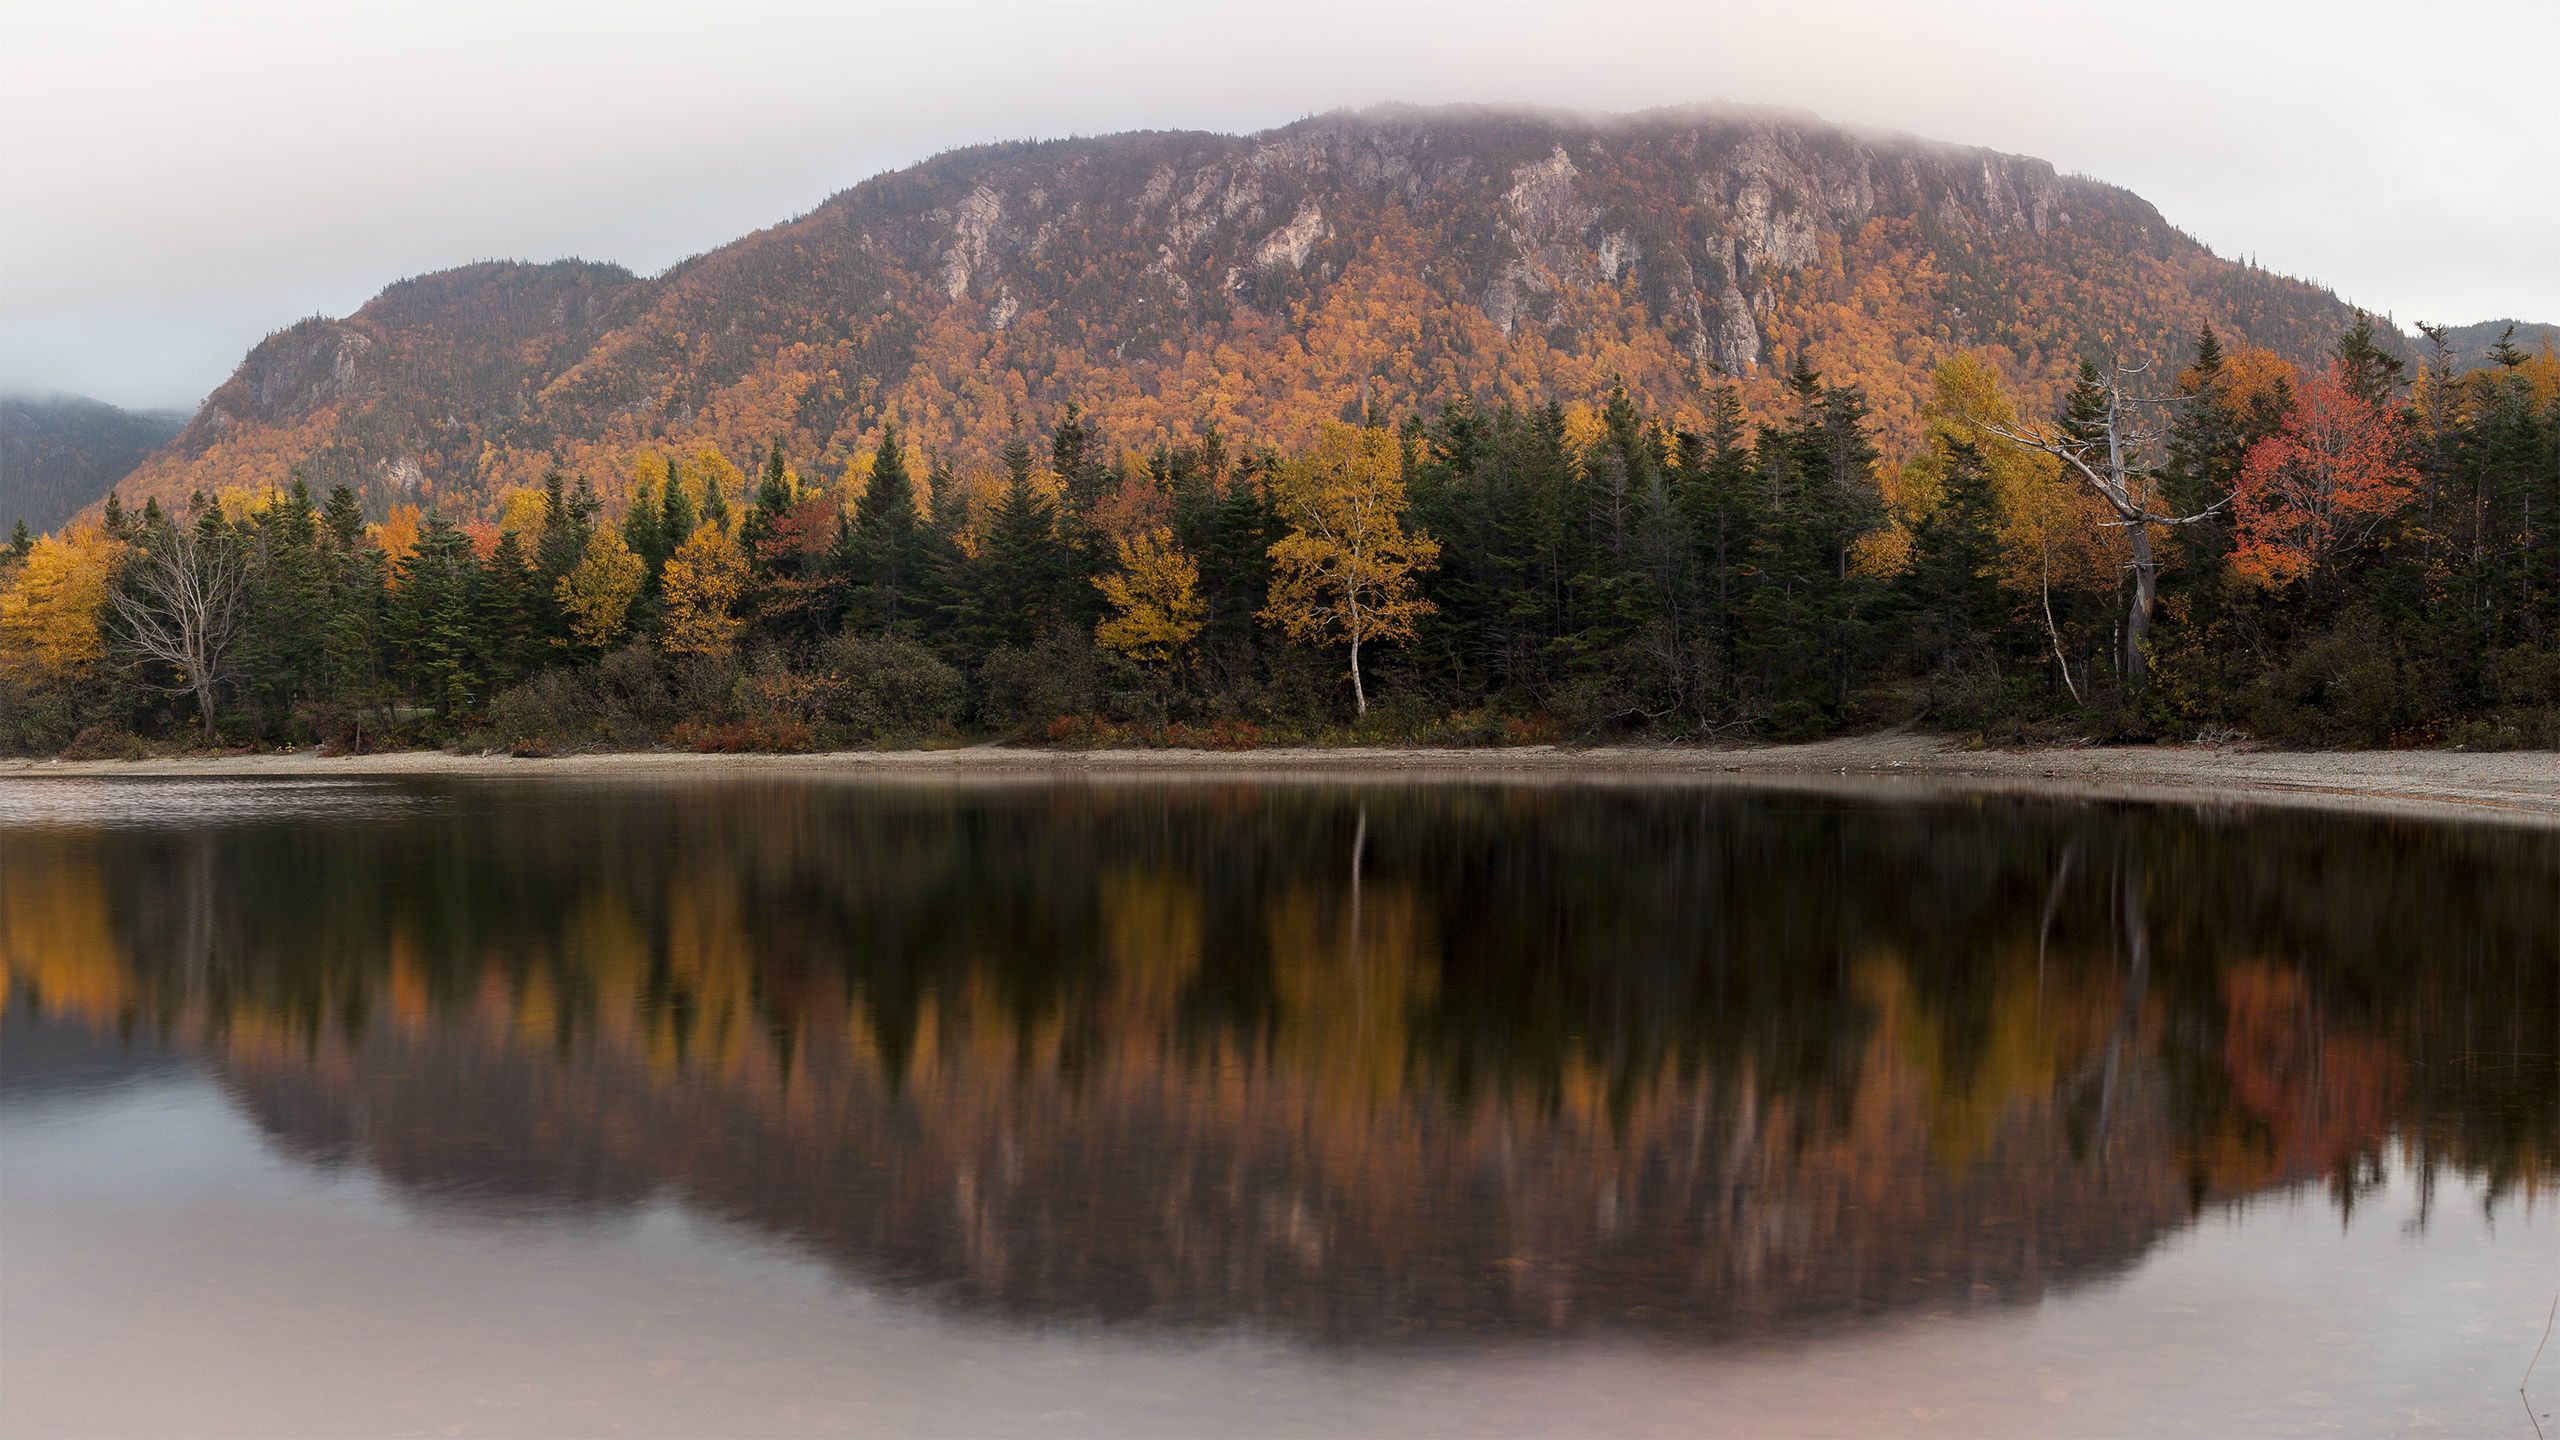 Barachois Park Newfoundland At Fall Submitted To WqHD Wallpaper By Ym